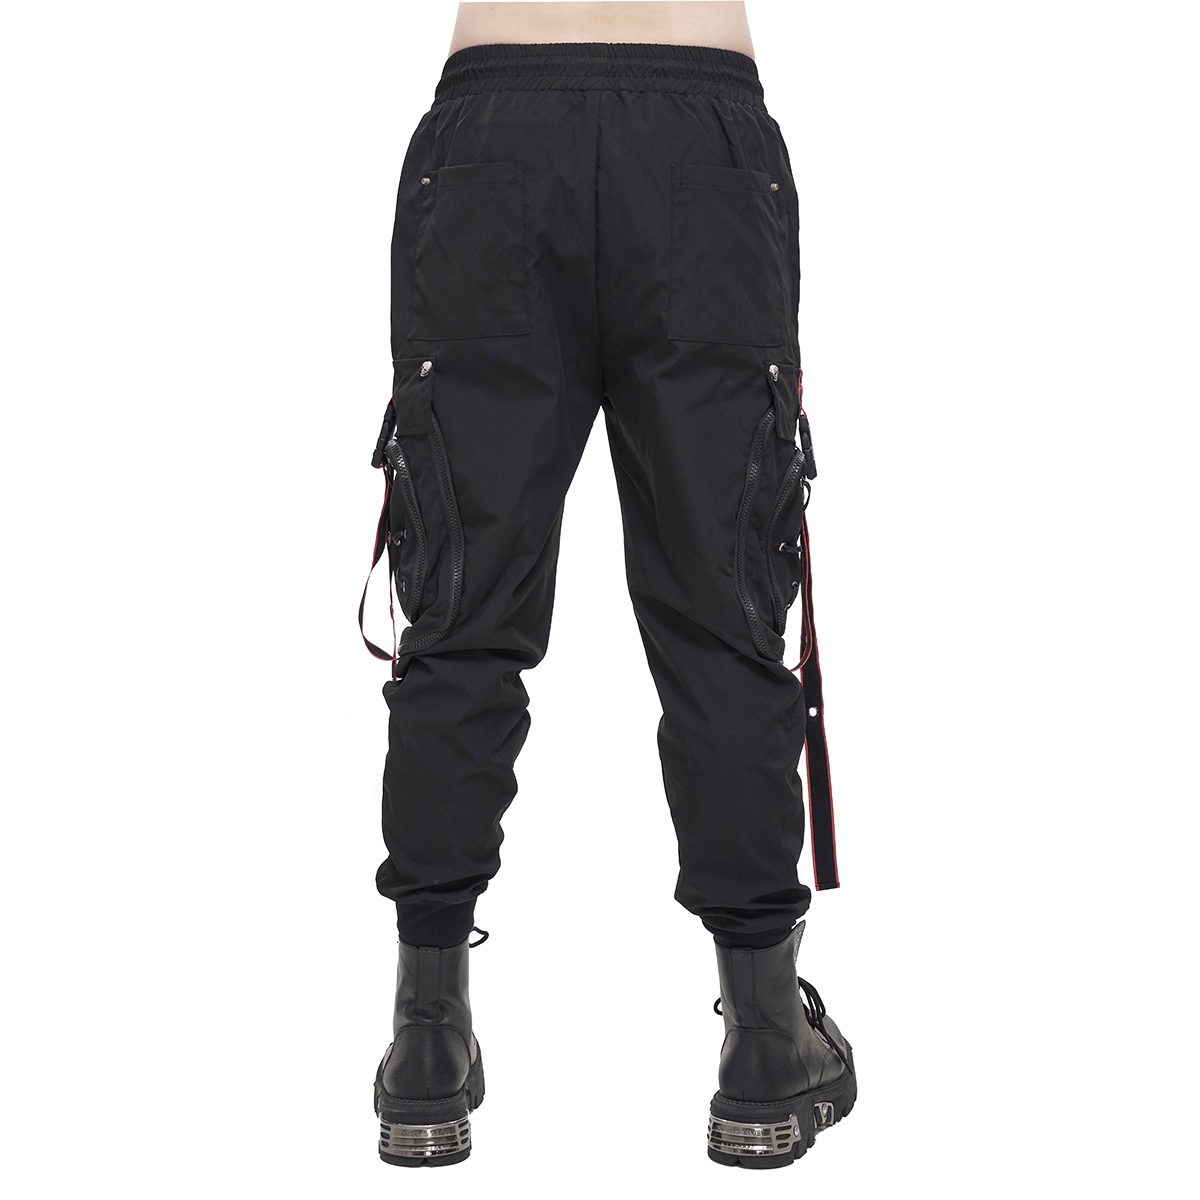 Men's Black Punk Long Cargo Trousers / Fashion Male Pants with Red Accents On Waist And Side Straps - HARD'N'HEAVY